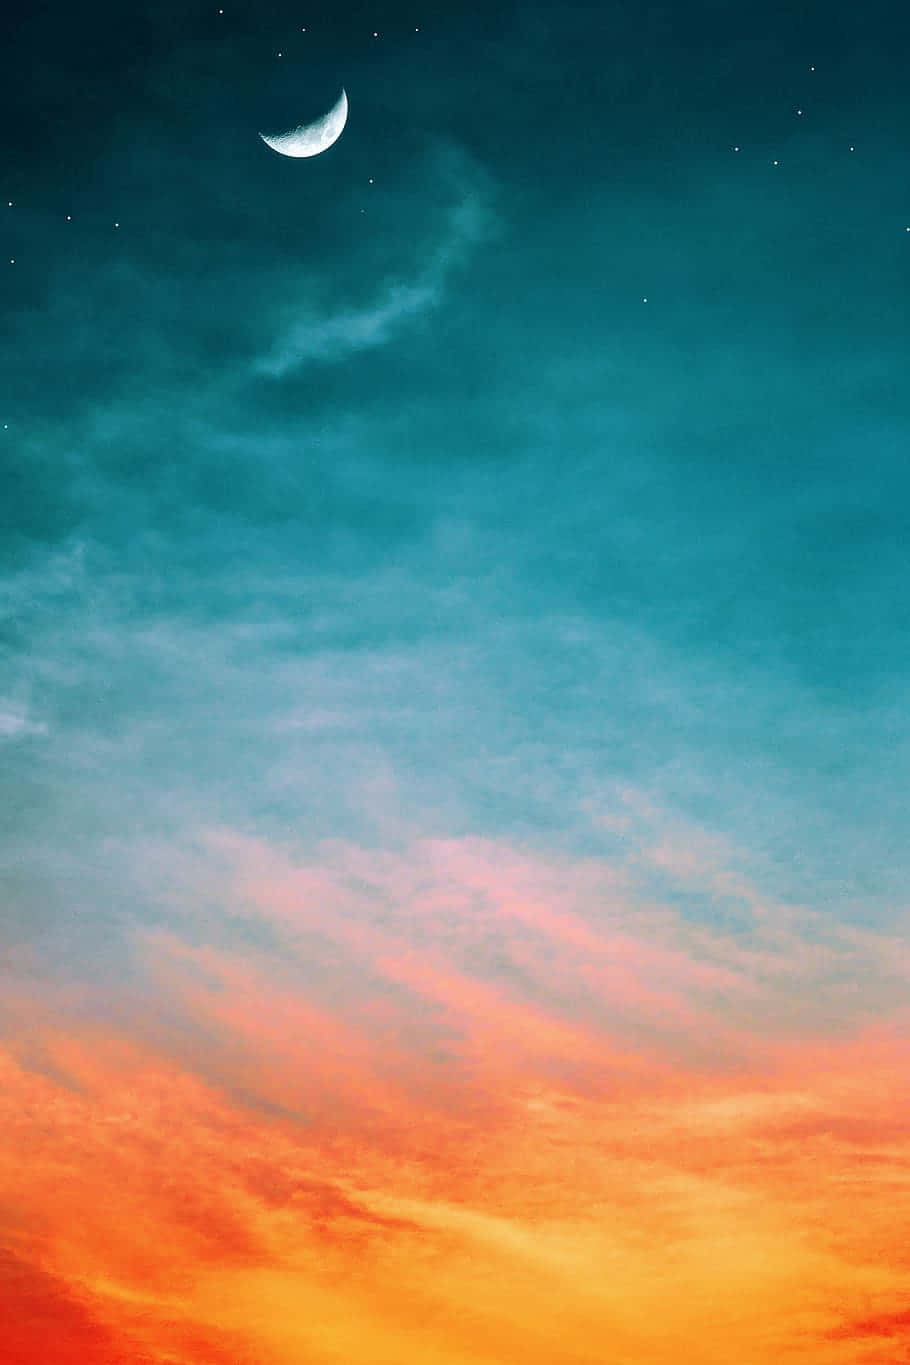 “The beautiful clouds move slowly across the sky.” Wallpaper